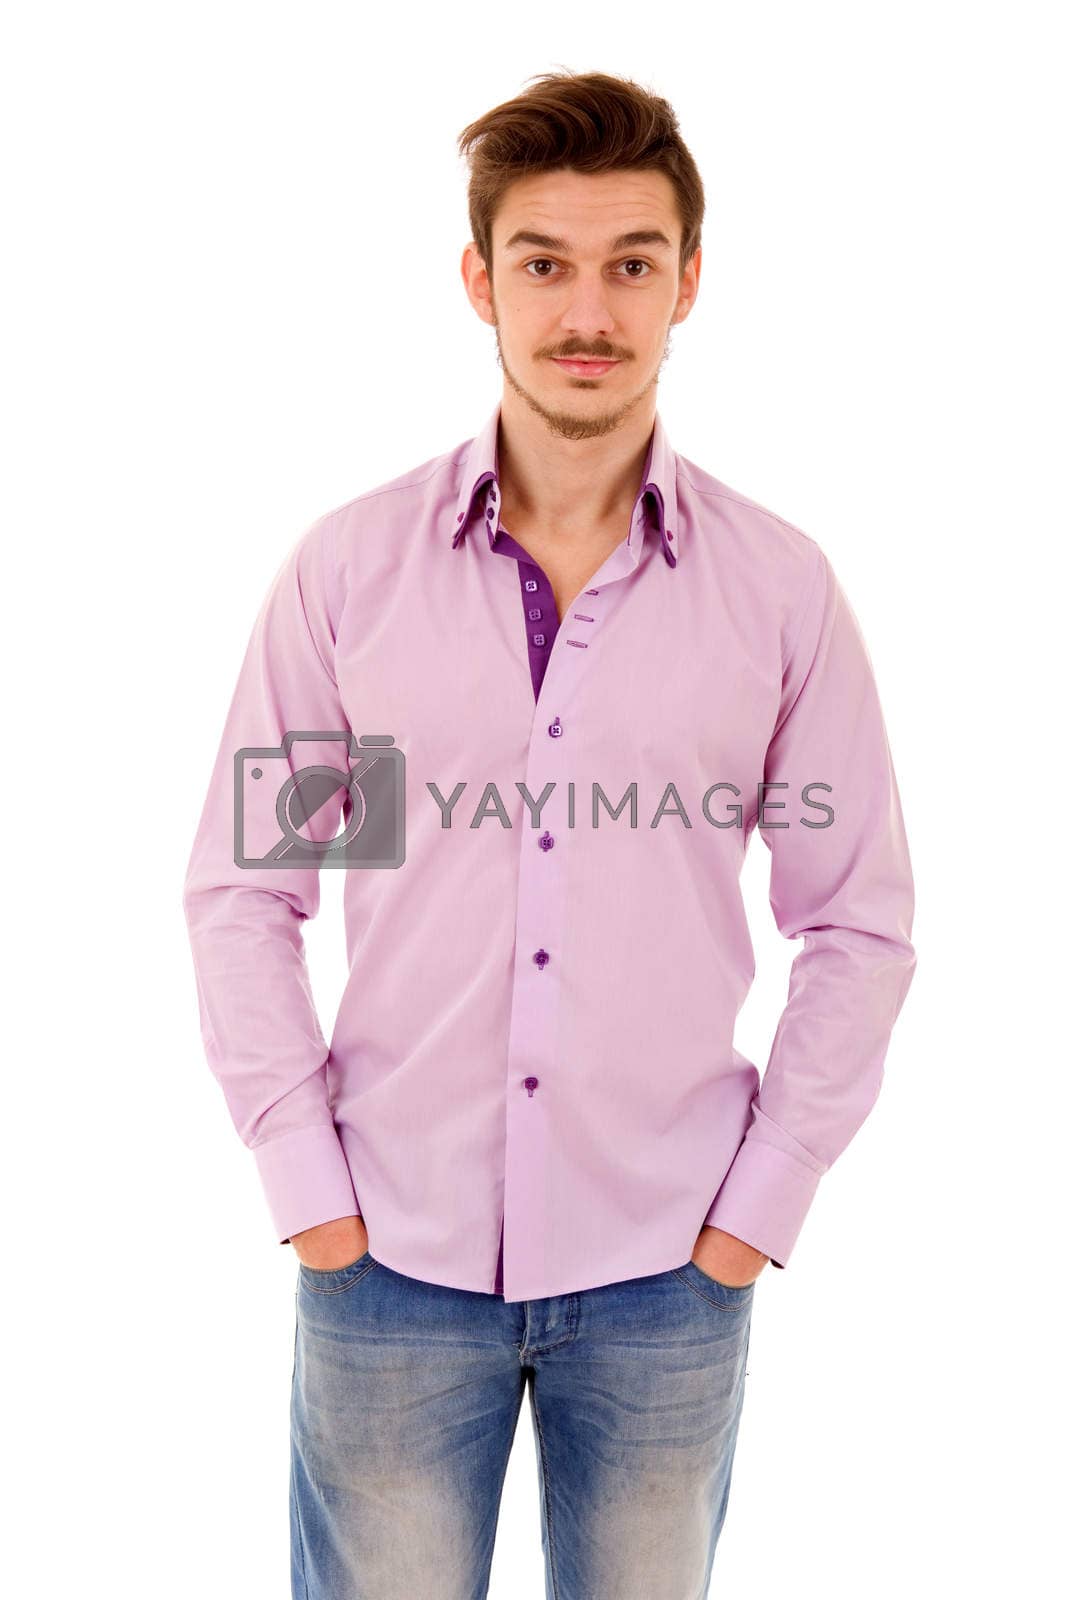 Royalty free image of happy casual man by zittto